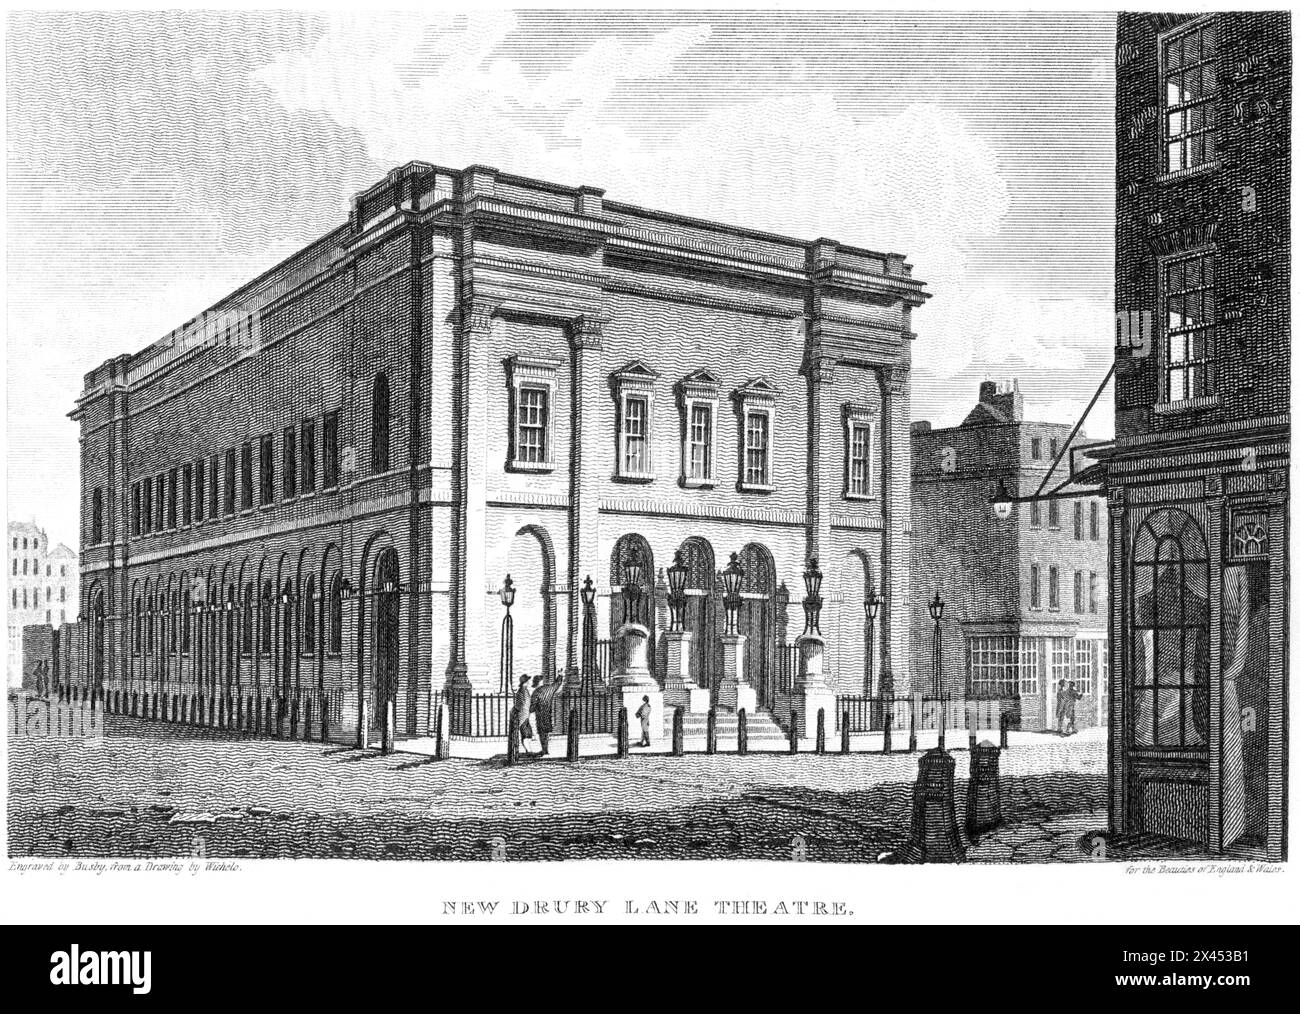 An engraving entitled New Drury Lane Theatre, London UK scanned at high resolution from a book published around 1815.  Believed copyright free. Stock Photo